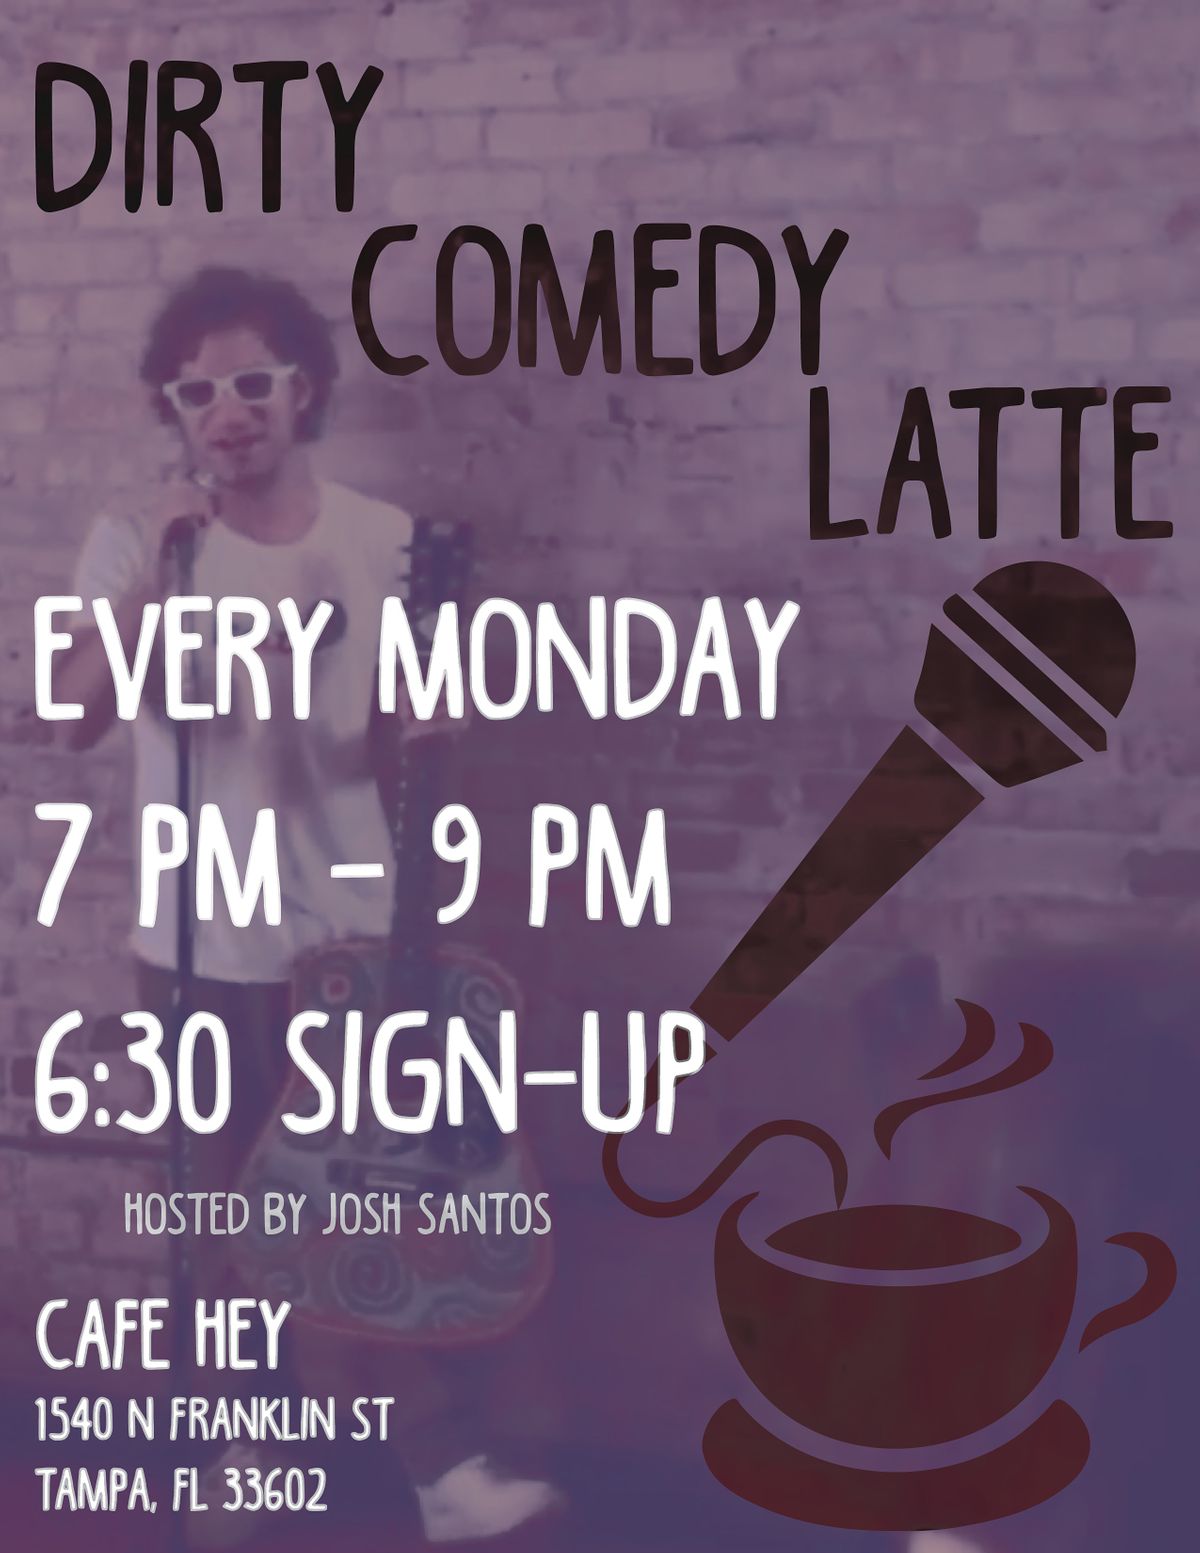 Dirty Comedy Latte